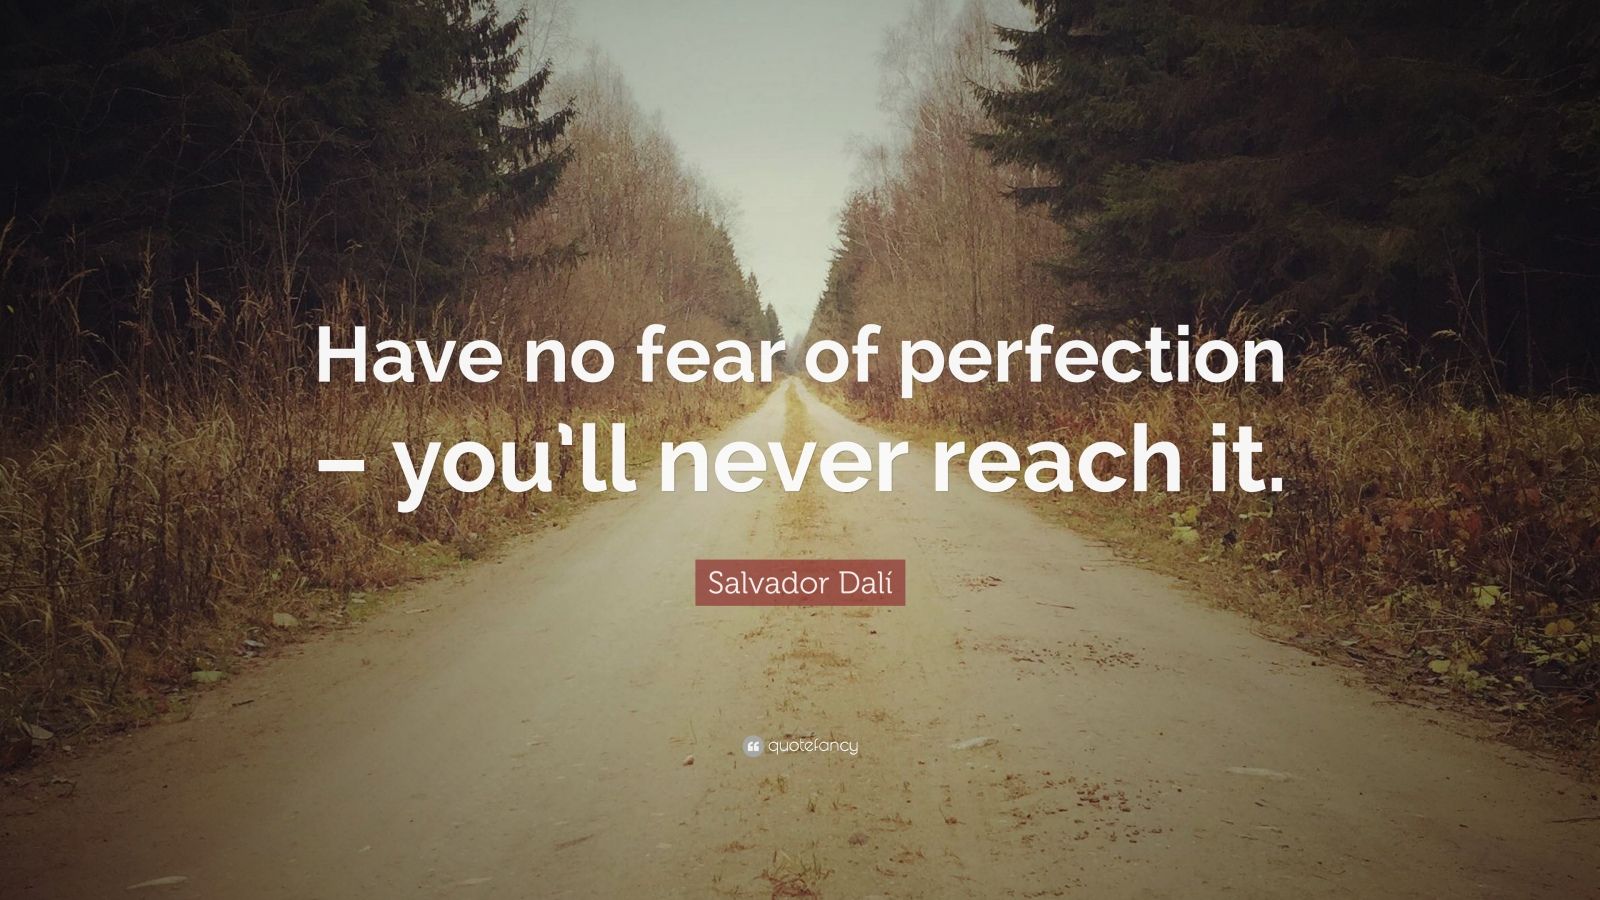 Salvador Dalí Quote: “Have no fear of perfection – you’ll never reach ...